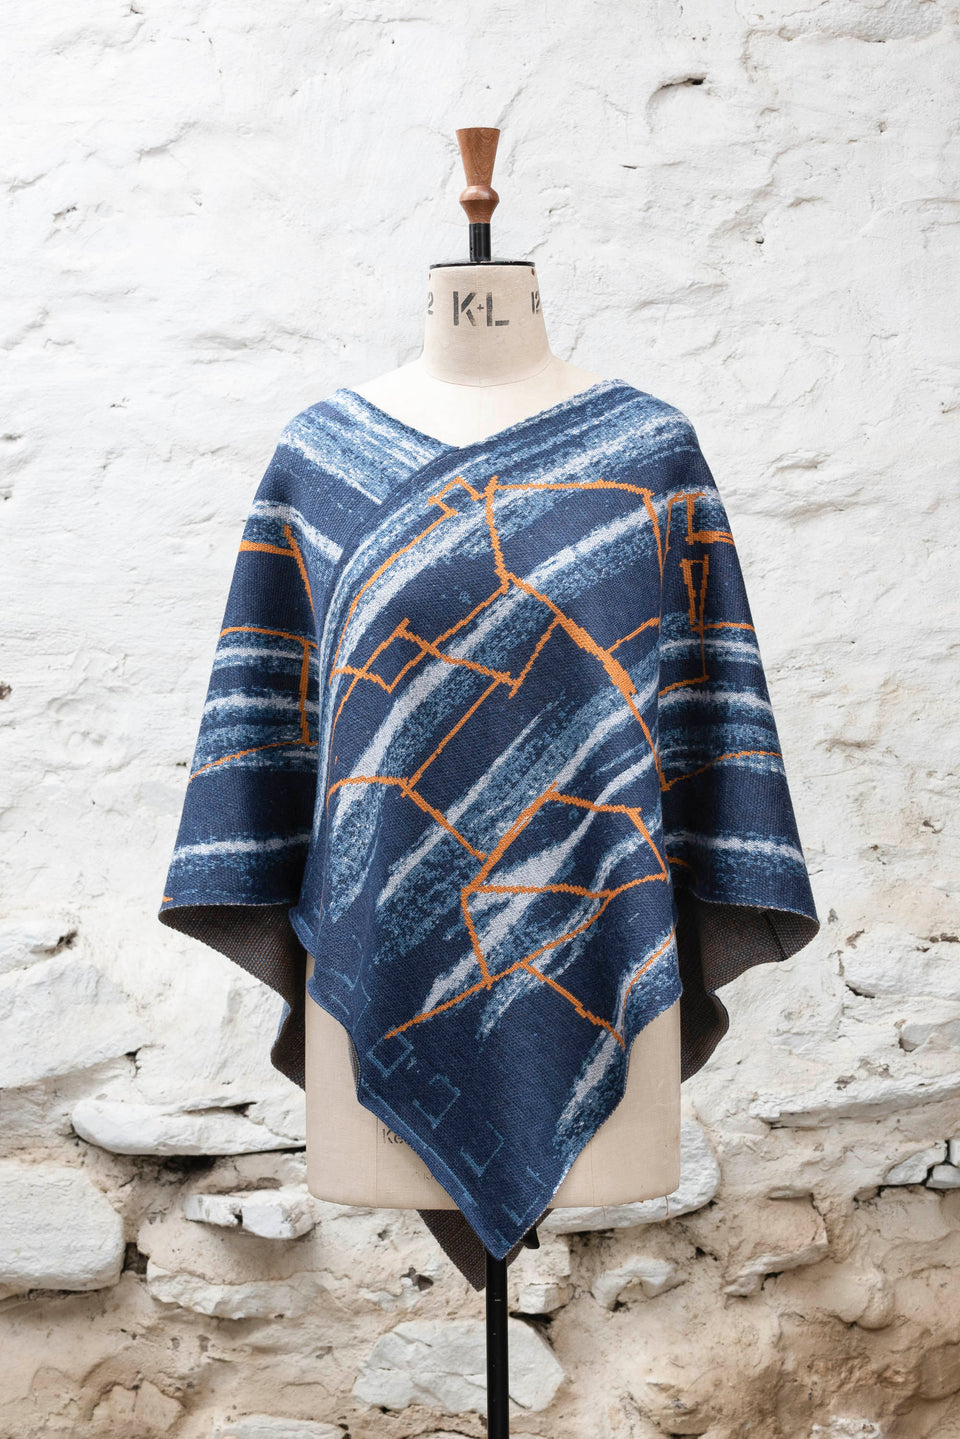 A knitted poncho, made in Shetland in a contemporary design by Nielanell with abstract blues and orange linear marks. Shown front on, and with the neck arrange as a V, on a vintage mannequin against a rustic white washed wall